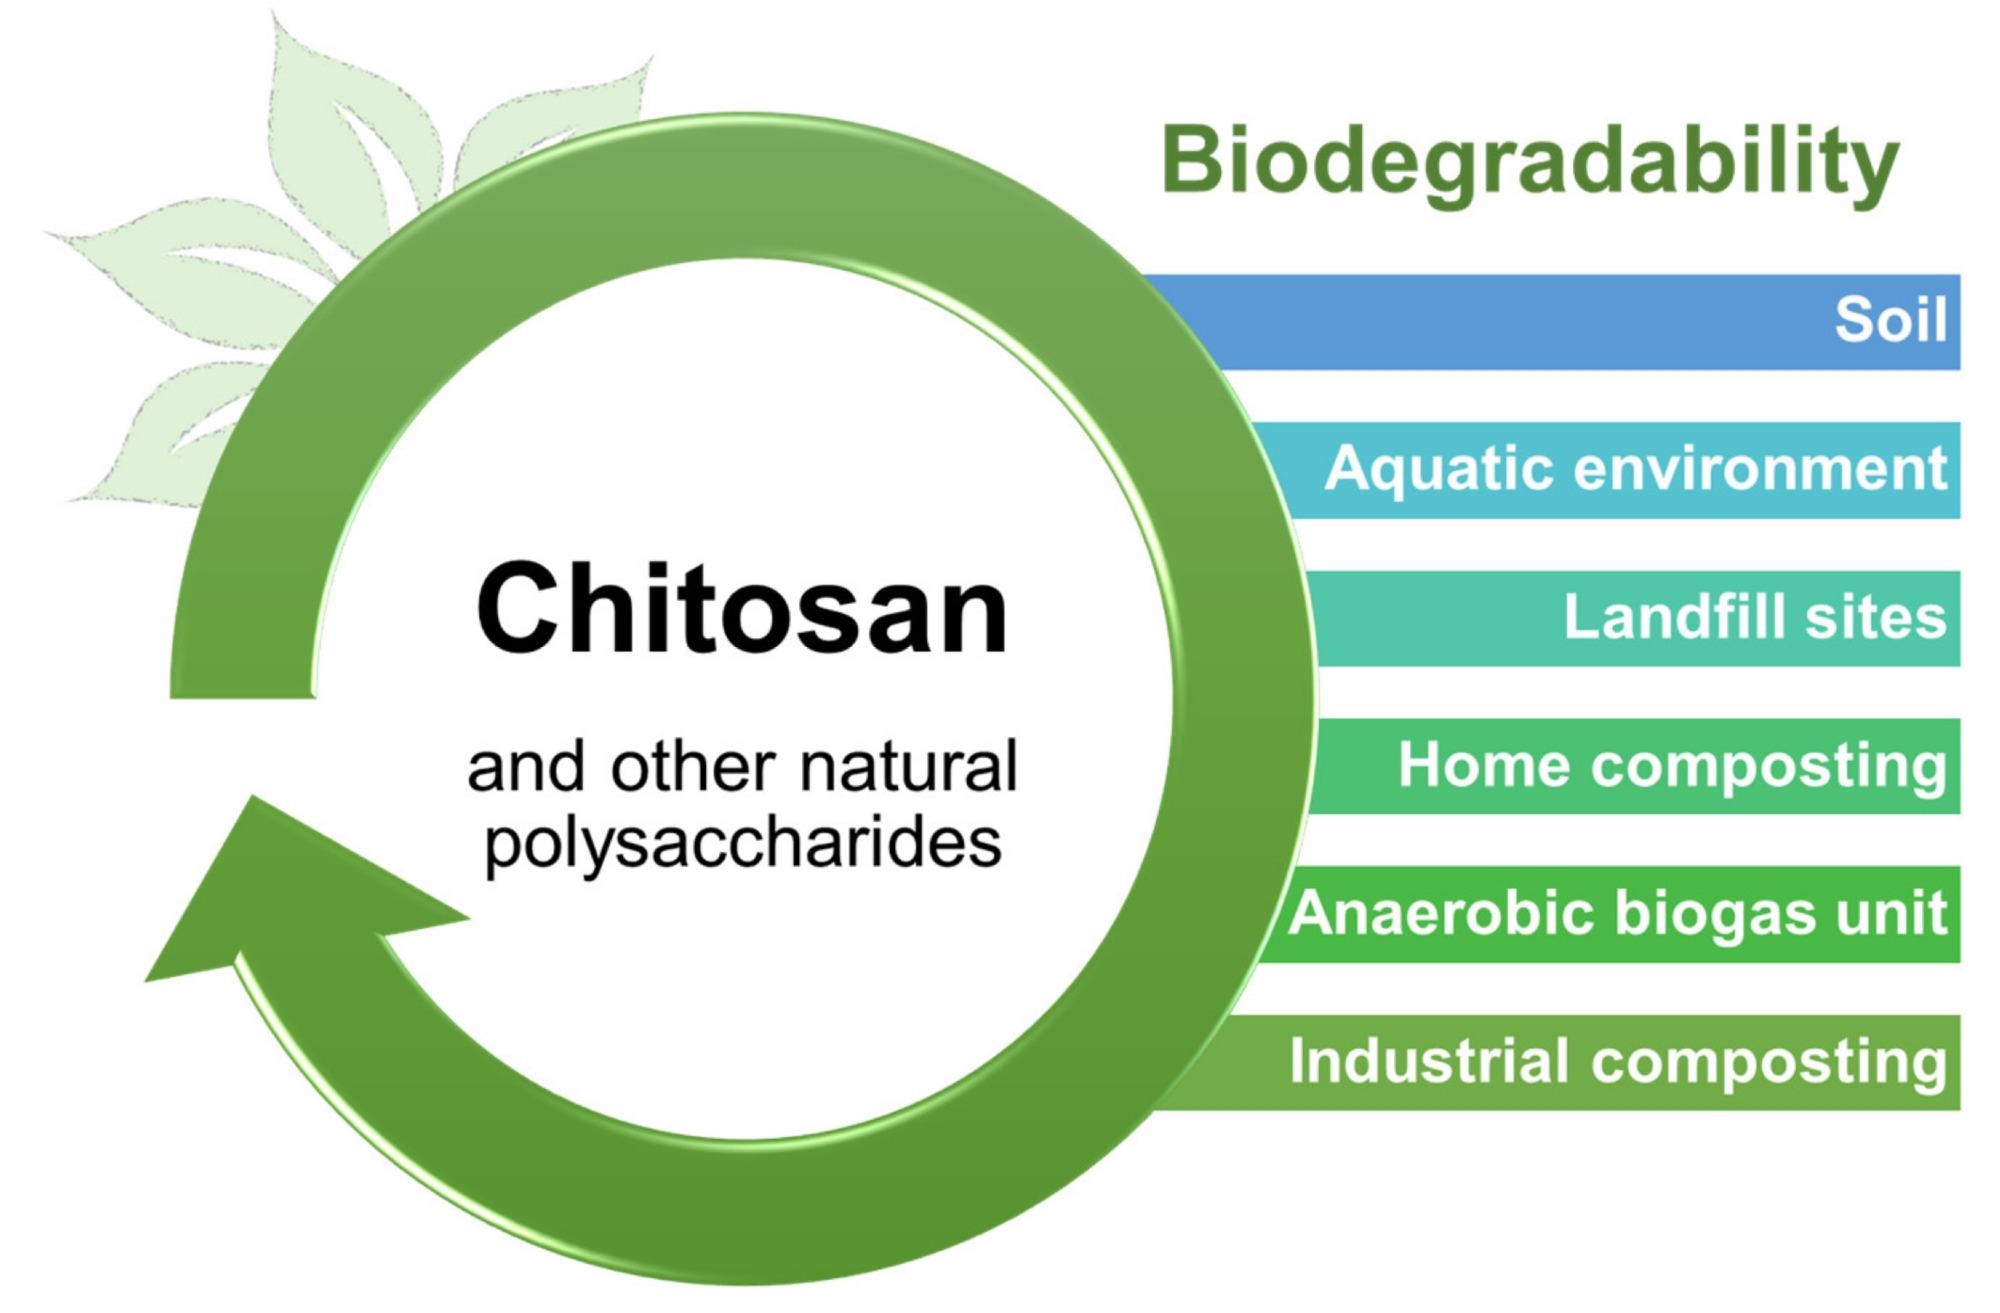 Biodegradability of chitosan and other natural polymers and on various environments